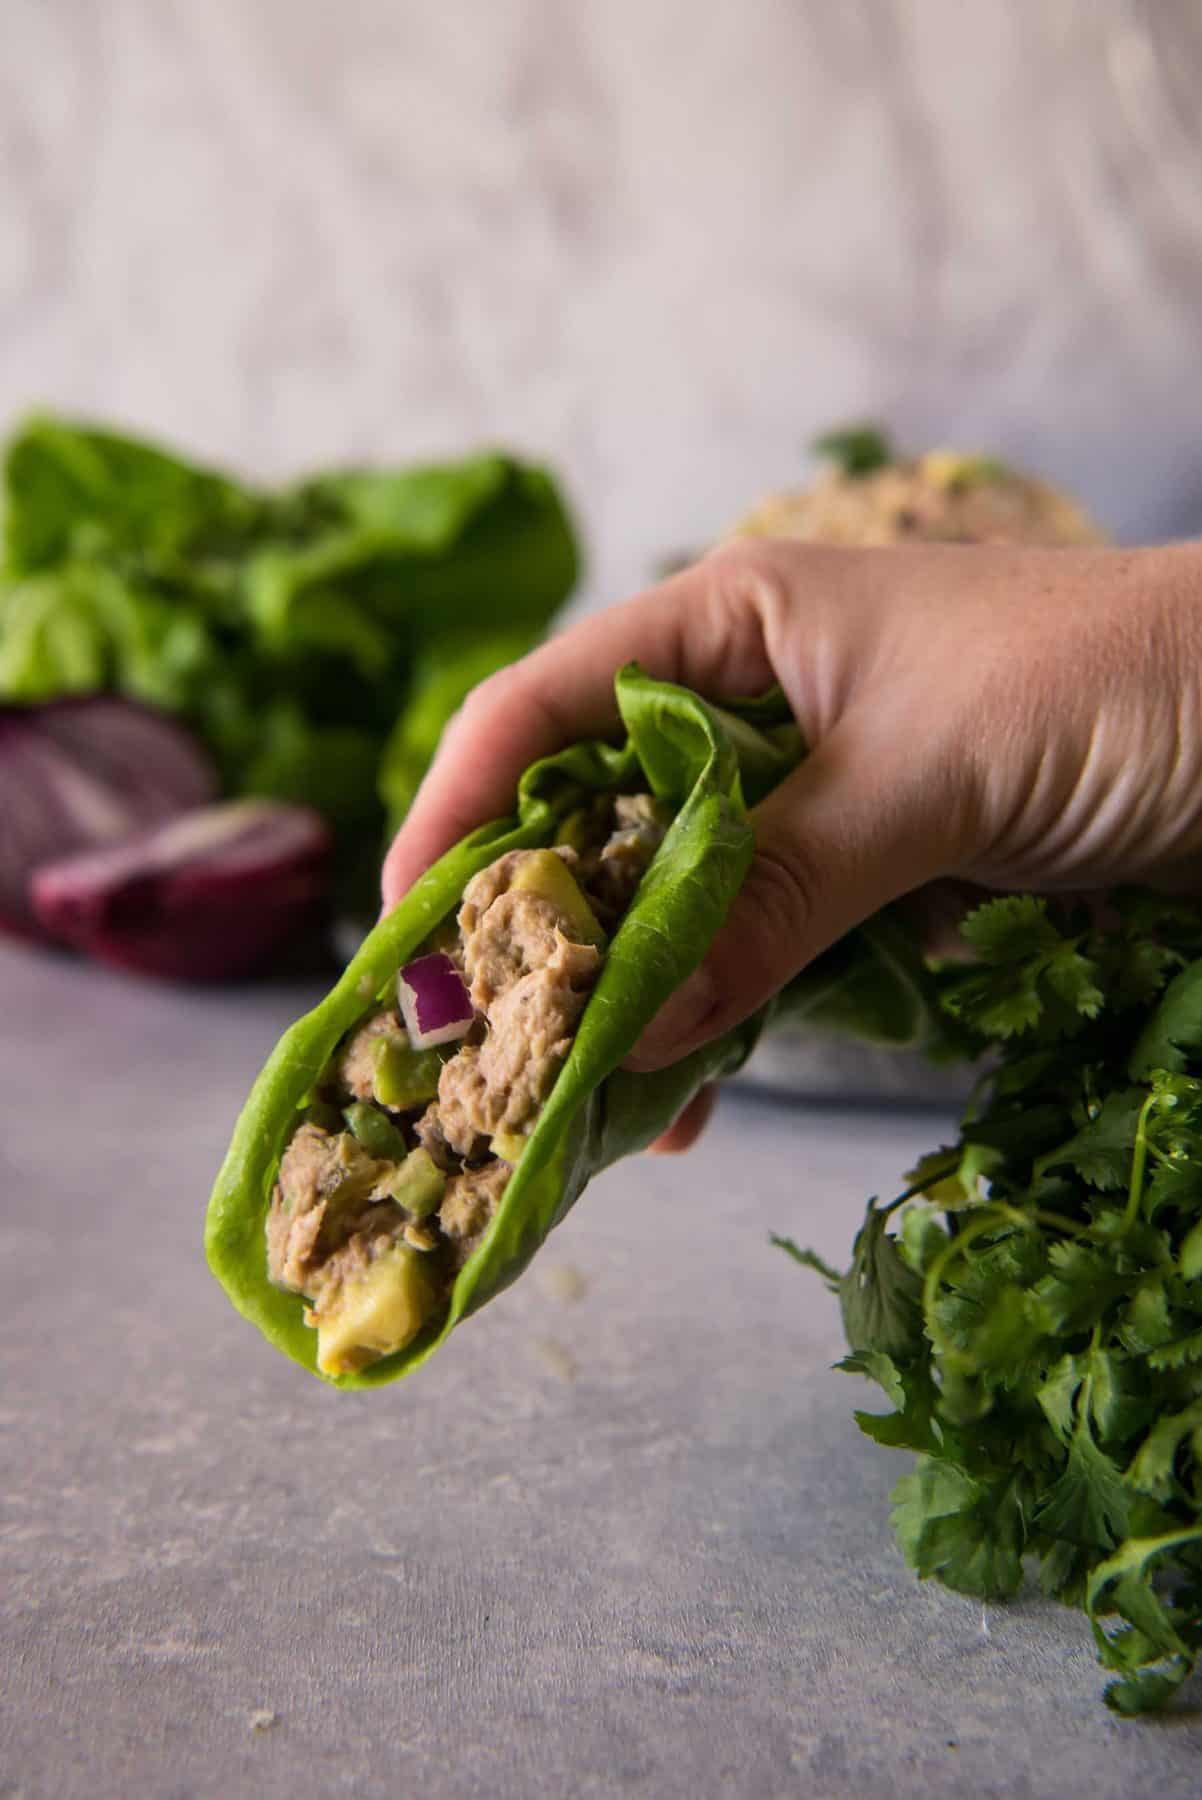 A hand holding a lettuce wrap filled with tuna avocado salad, with fresh greens and herbs in the background.